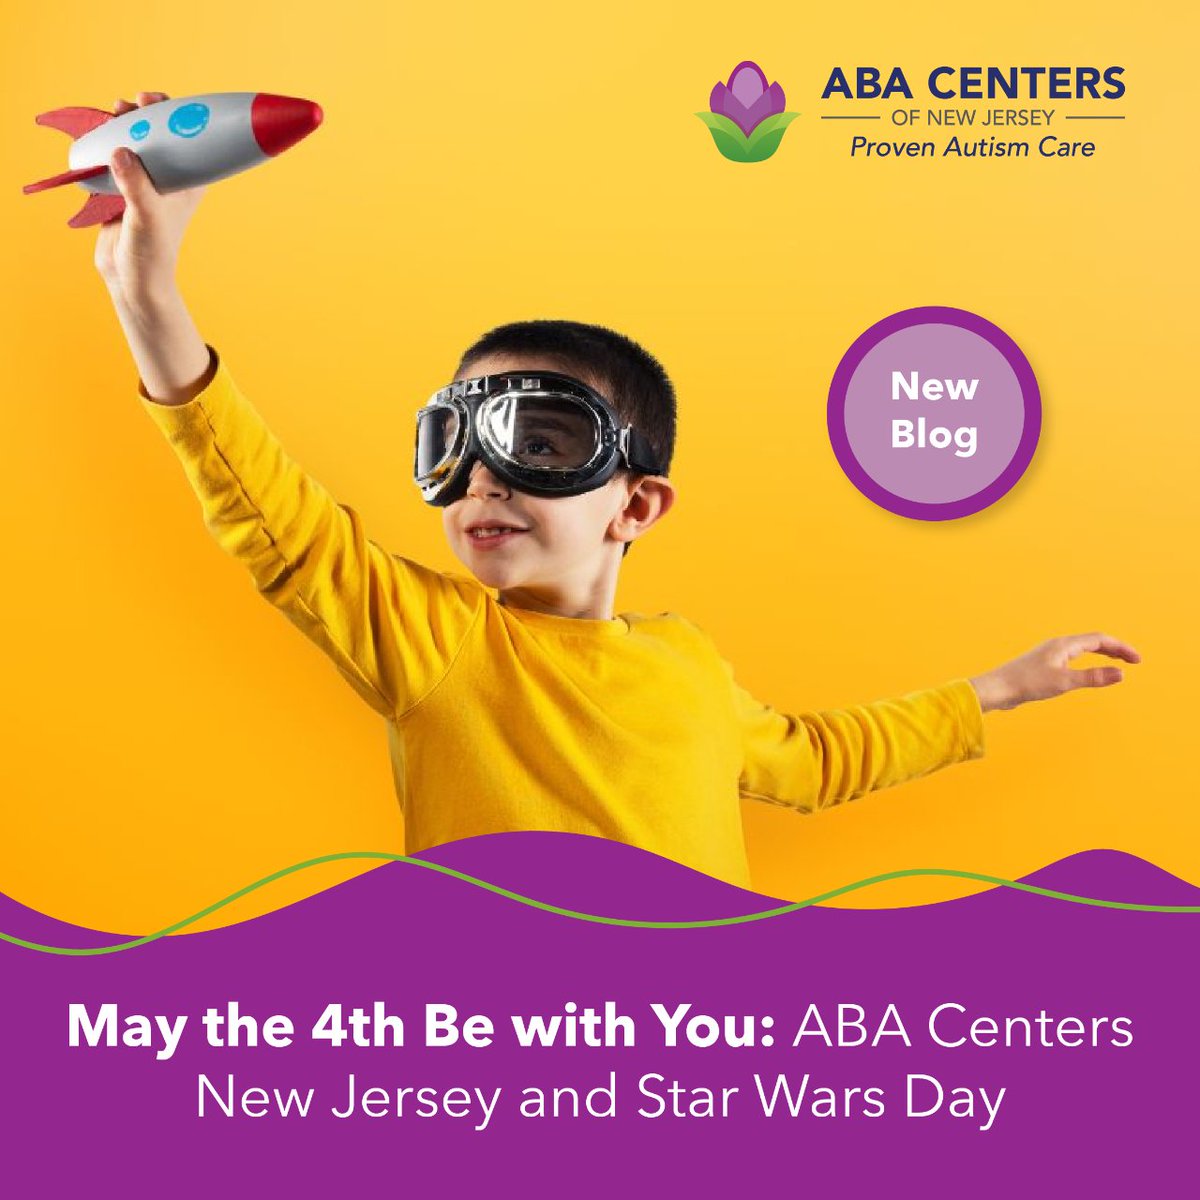 ABA Centers of New Jersey recognizes the impact of Star Wars on children, especially those on the spectrum. Explore how Star Wars can help kids with meaningful engagement and growth. Read here: bit.ly/abanjba050424x.

#ABACentersOfNewJersey #BlogPost #NewArticle #ABABlog